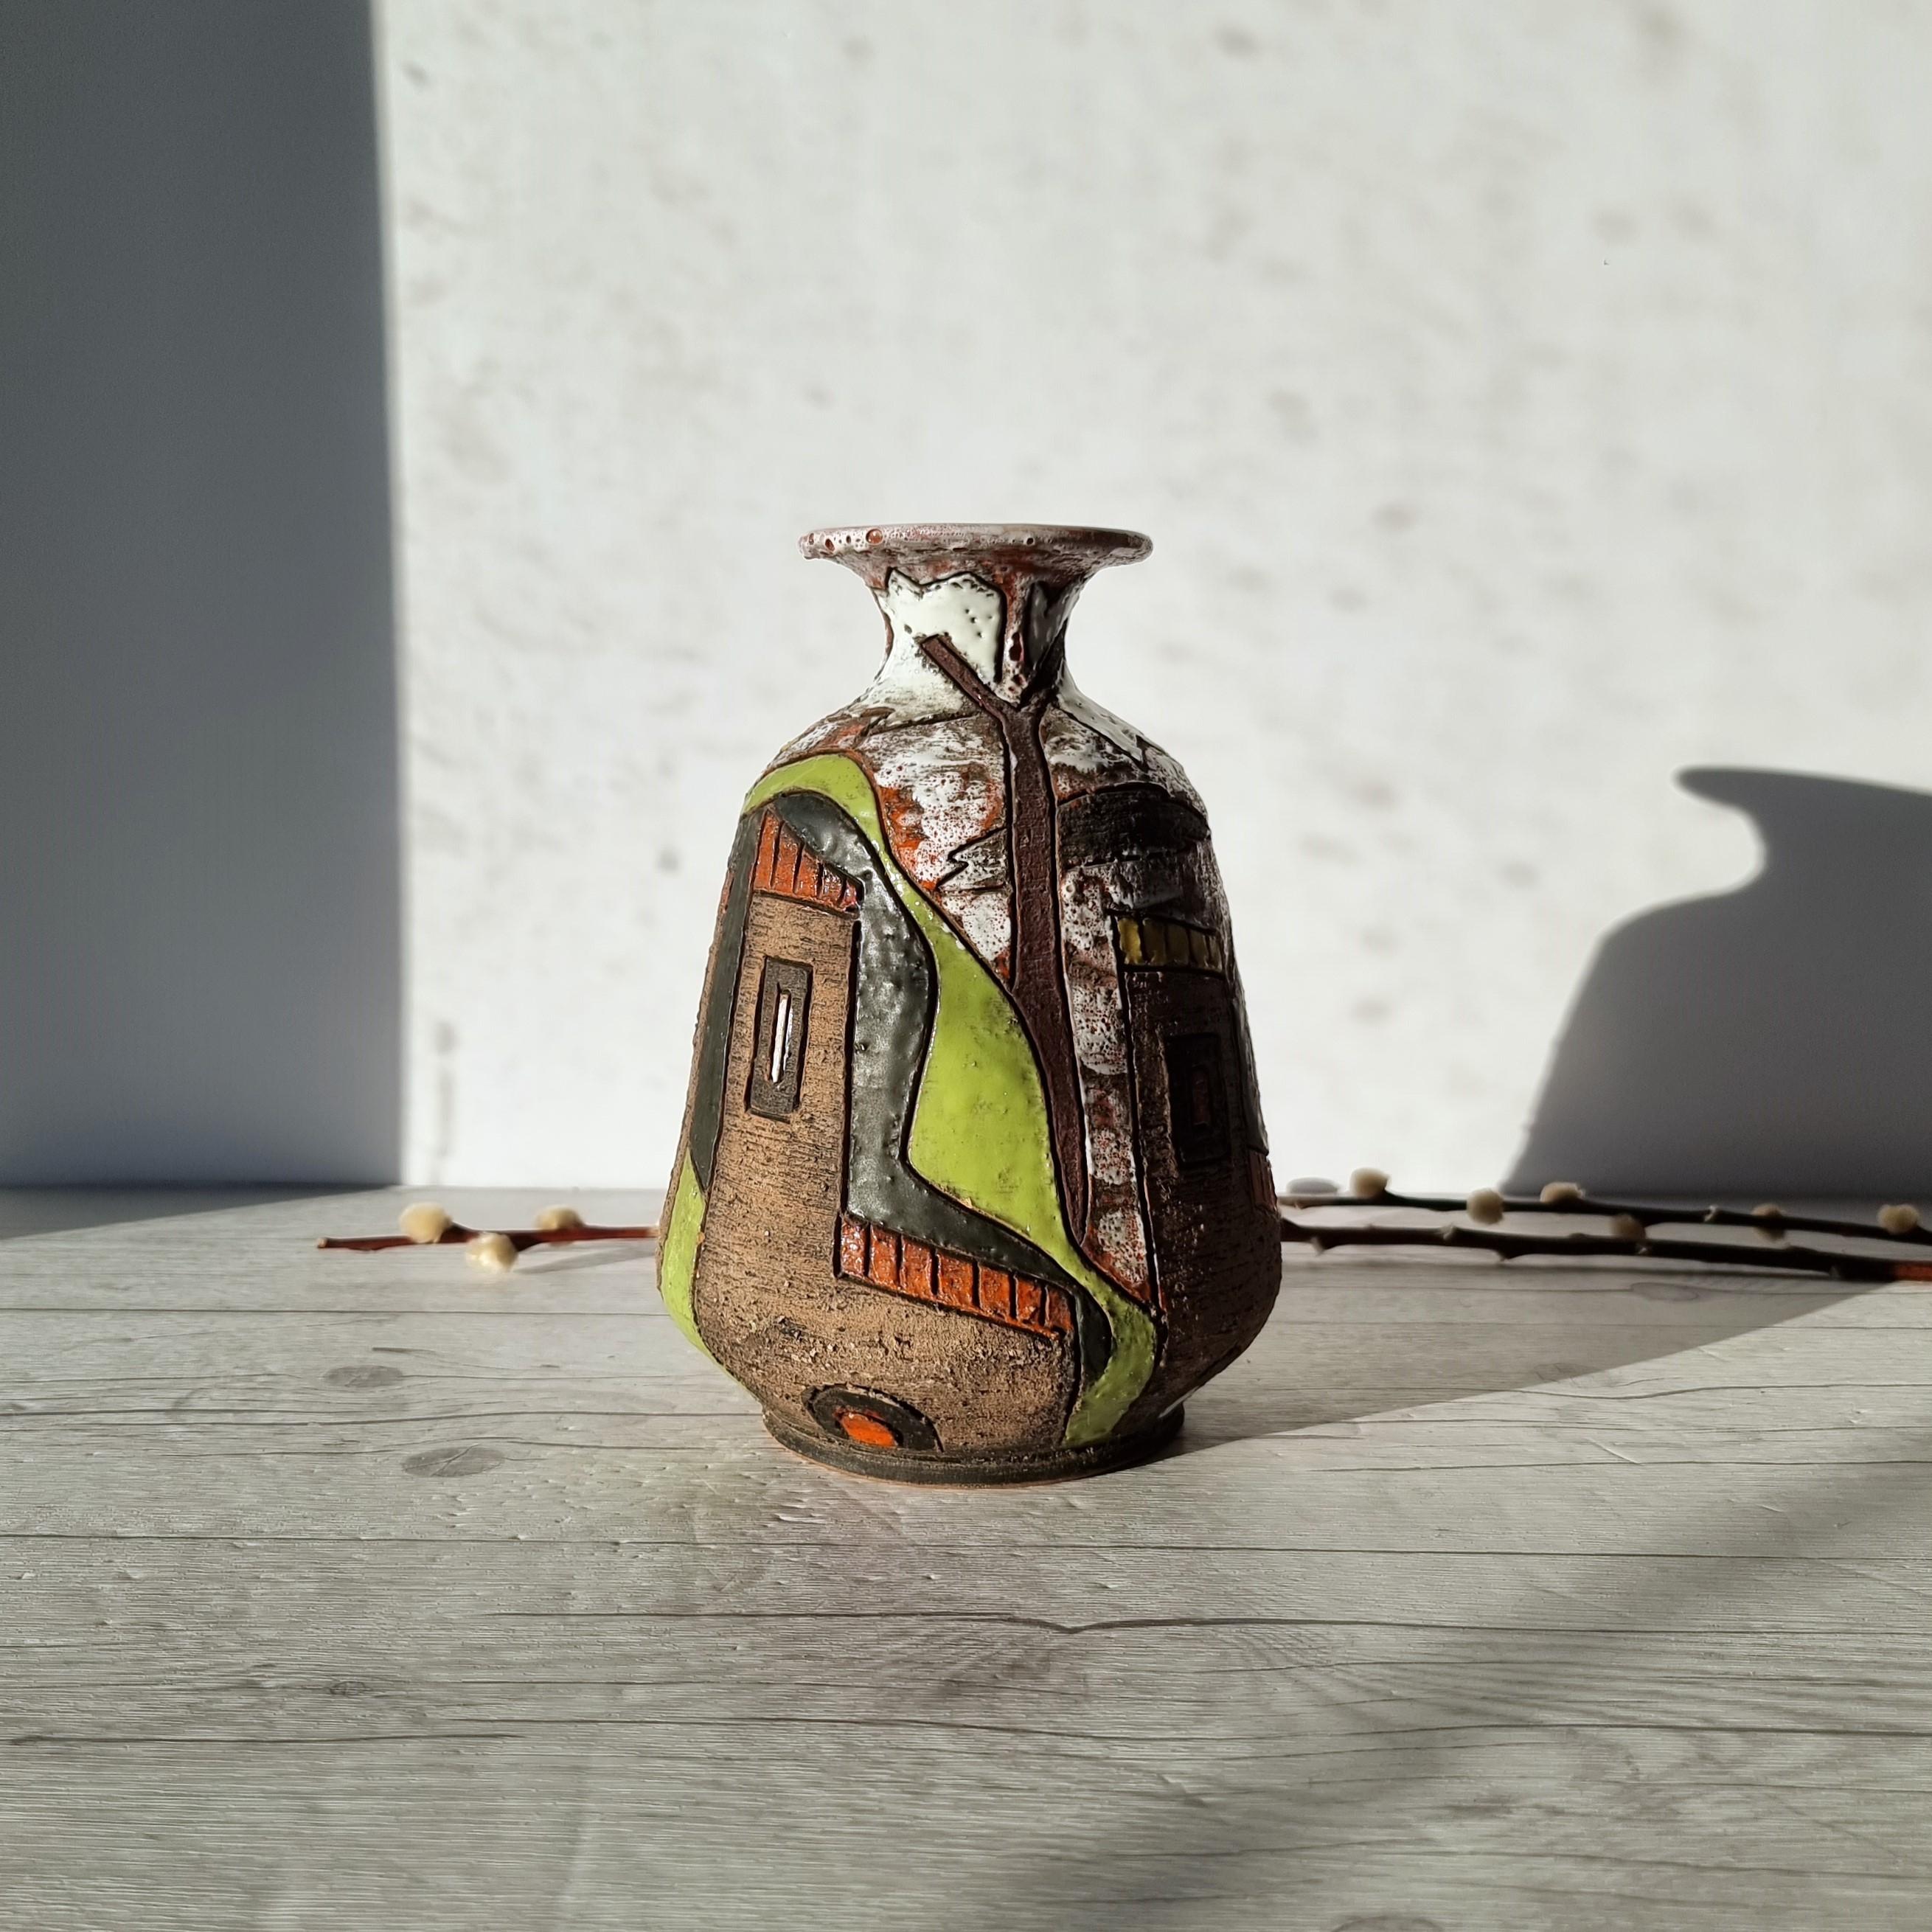 This rare and stunning work of Italian Mid-Century Modern art pottery is by Fratelli Fanciullacci (1862-1988) from the stylised Town series that was designed and in production between the 1950s to 1960s, during the Italian ceramics boom.

The Town